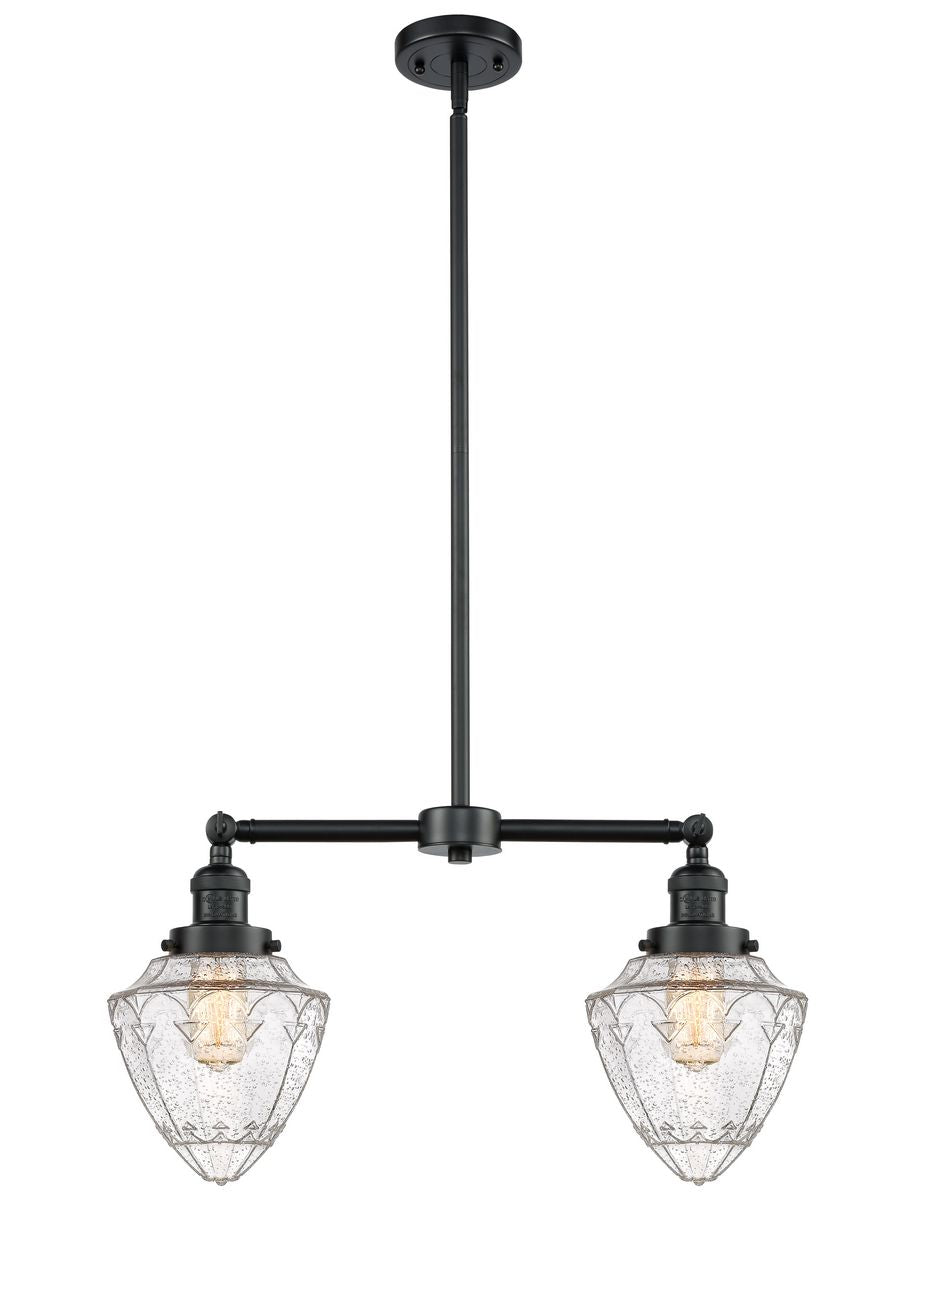 209-OB-G664-7 2-Light 24" Oil Rubbed Bronze Island Light - Seedy Small Bullet Glass - LED Bulb - Dimmensions: 24 x 7 x 15.25<br>Minimum Height : 24.25<br>Maximum Height : 48.25 - Sloped Ceiling Compatible: Yes